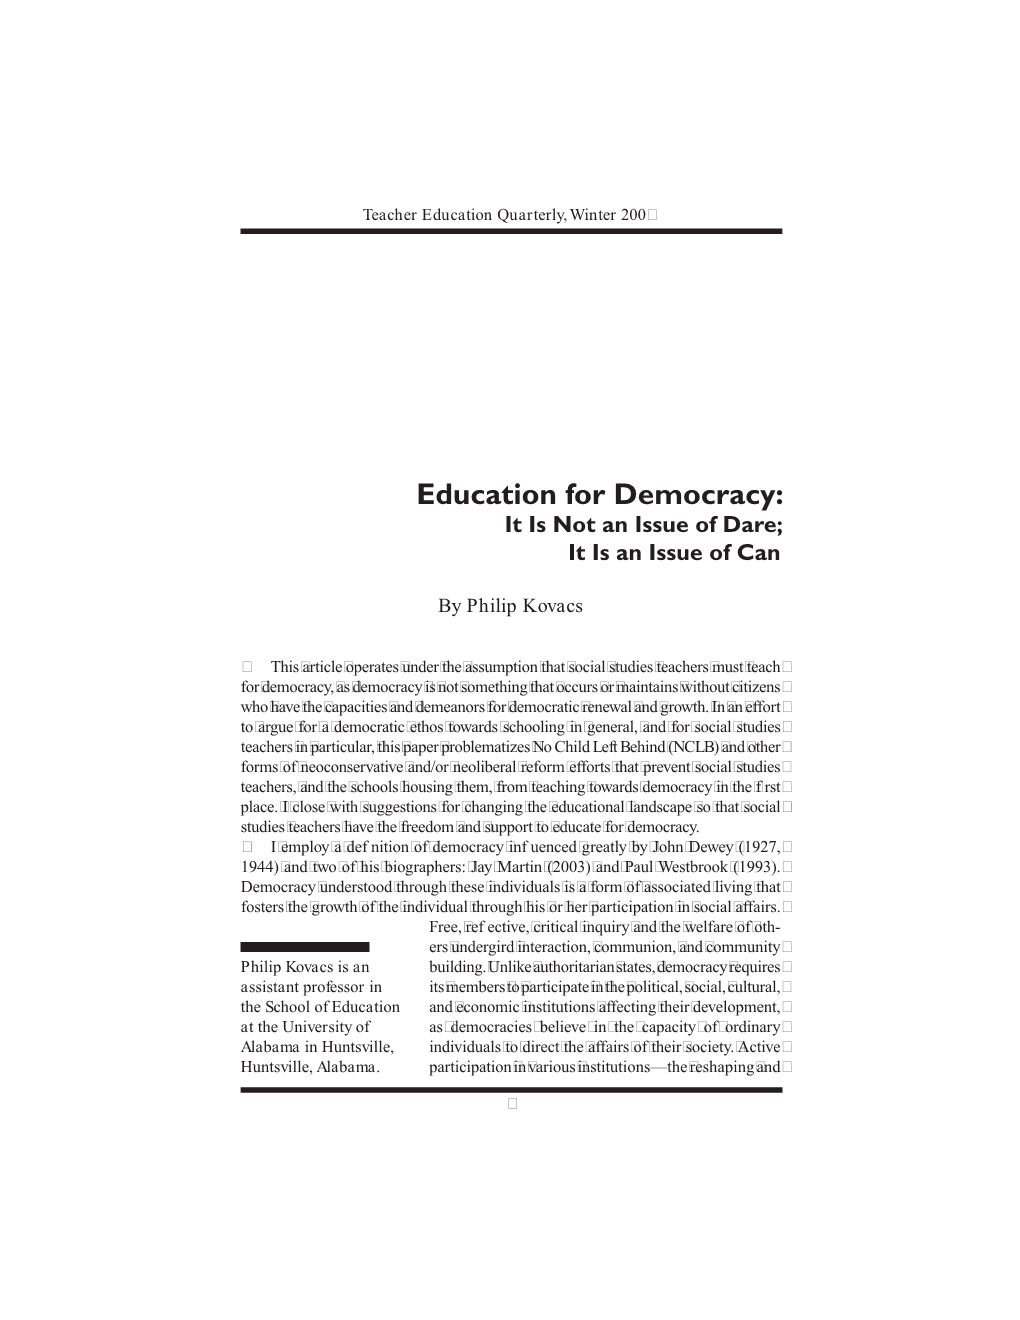 Education for Democracy: It Is Not an Issue of Dare; It Is an Issue of Can